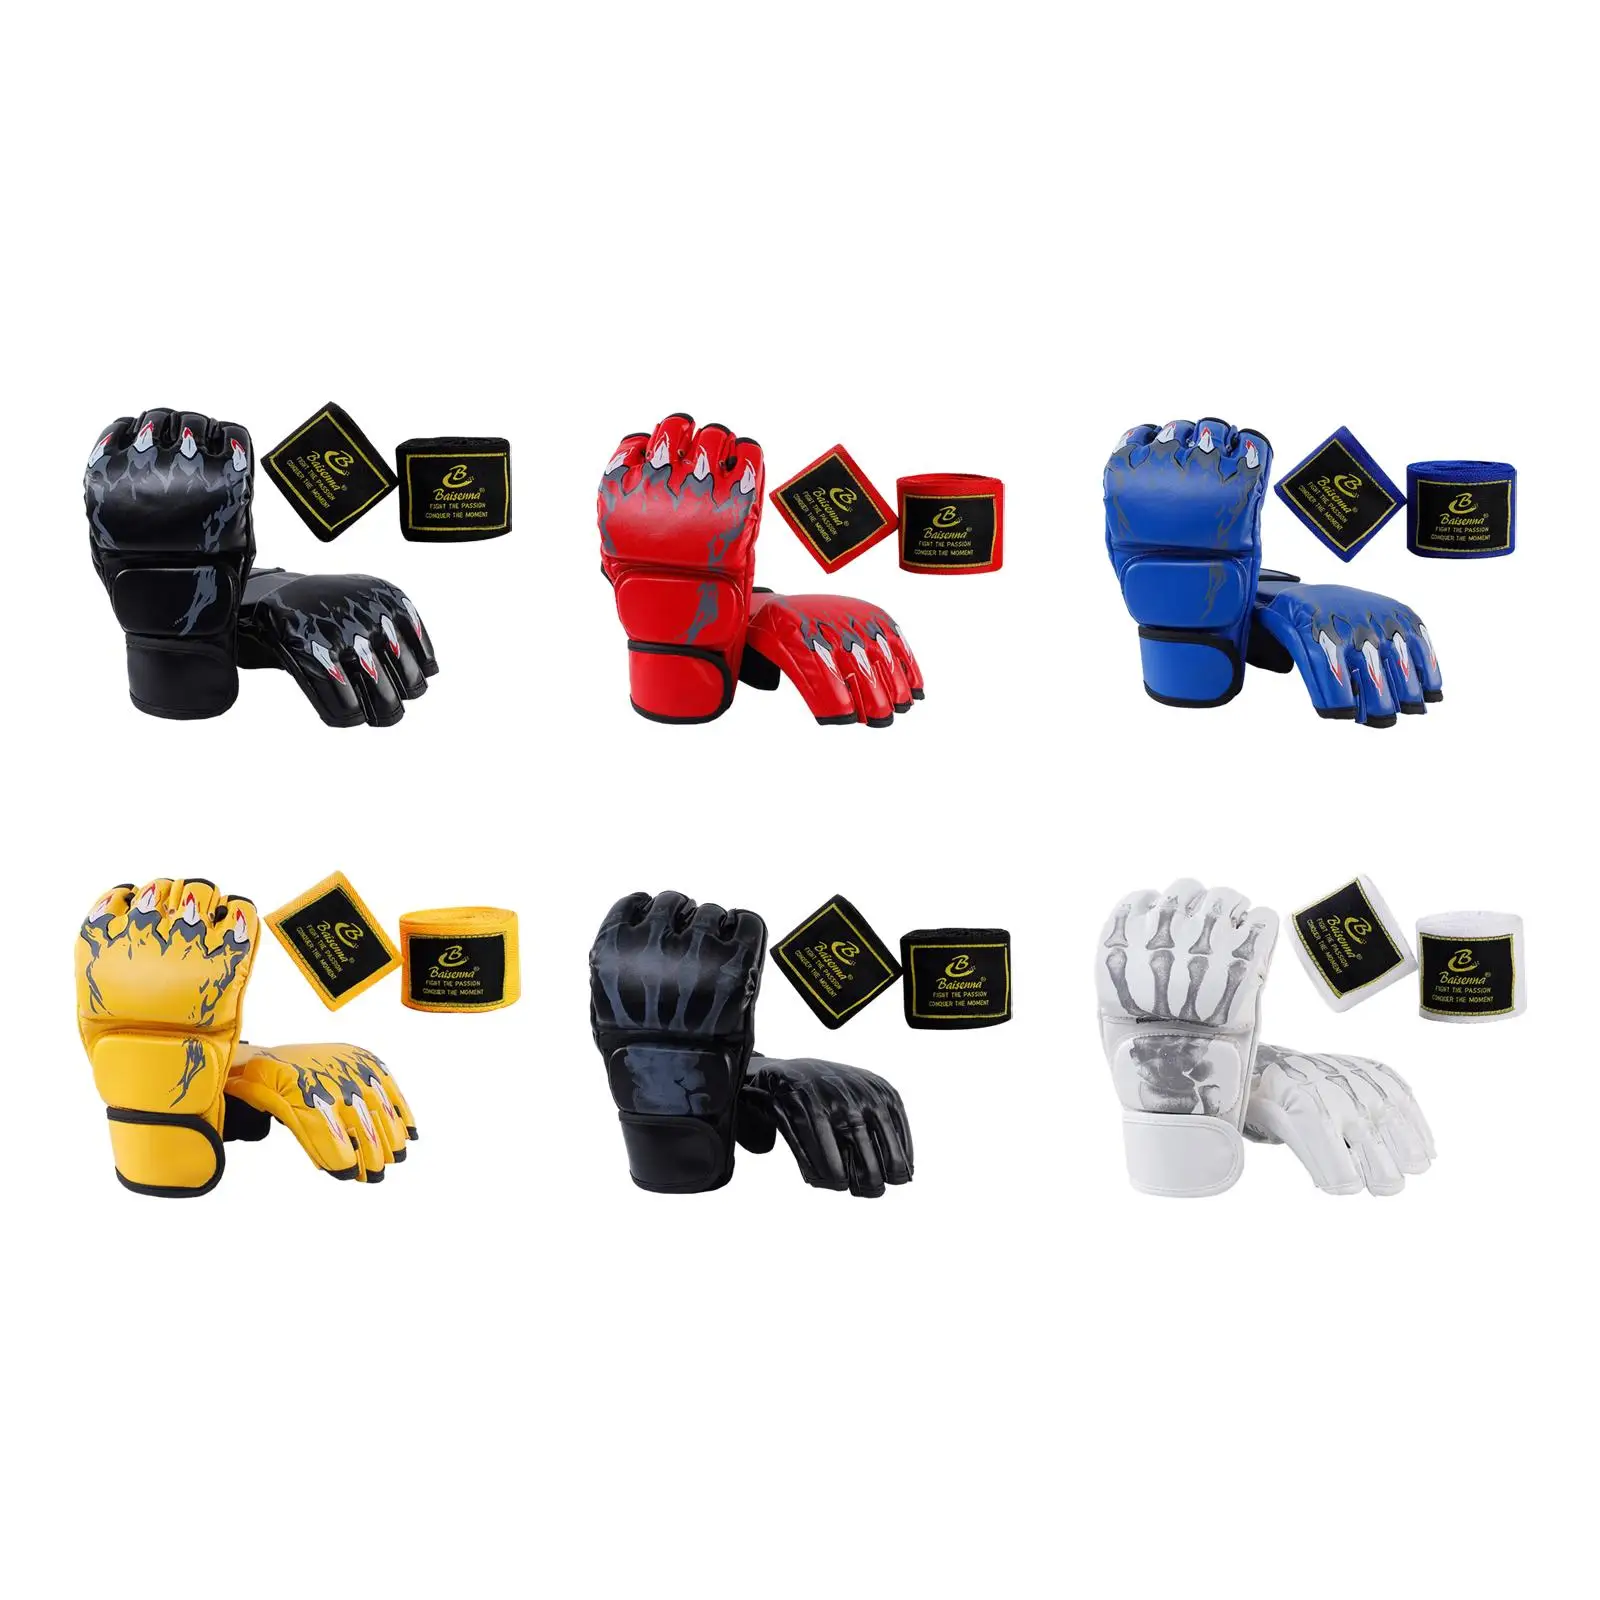 MMA Gloves with Adjustable Wrist Band Mitts Sport Mittens for Men Women Half Finger Boxing Gloves for Punching Bag Martial Arts